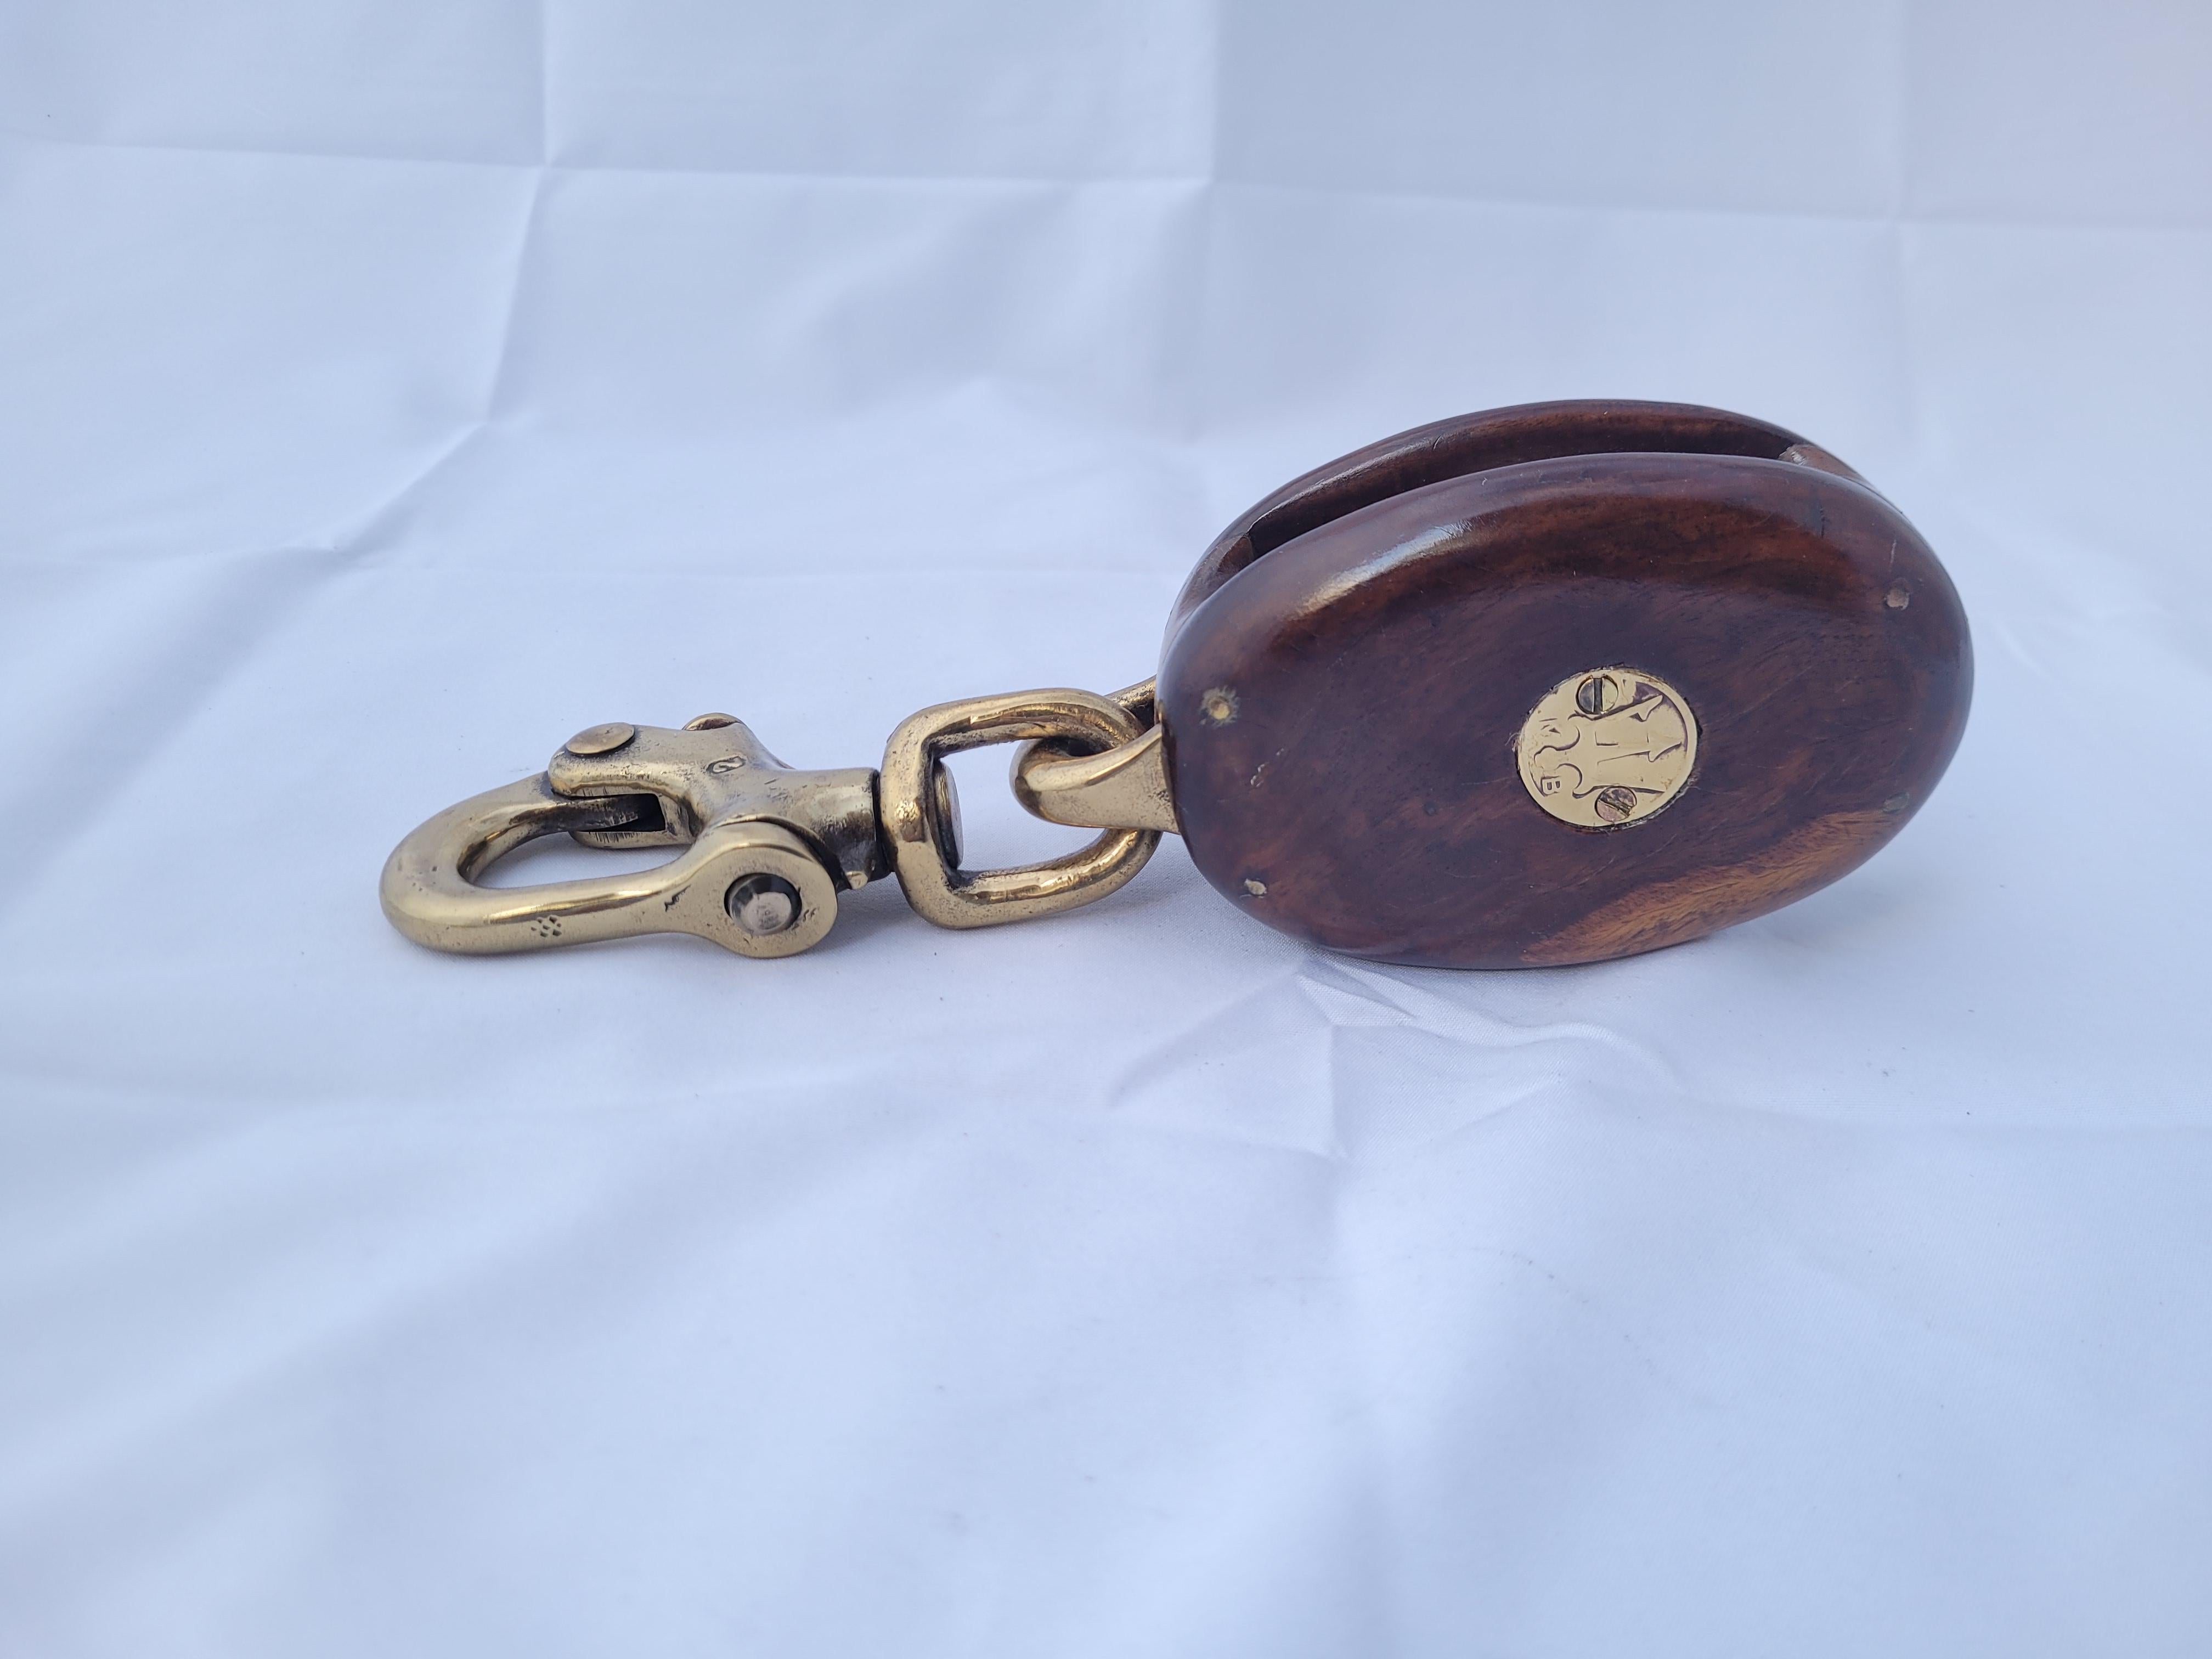 Choice marine block by Merriman of Boston. Rosewood with highly polished brass pulley, pins, shackle, and badges with trident forks. Amazing finish. Great nautical accent. First Class.

Weight 2 lbs.
Overall Dimensions 2